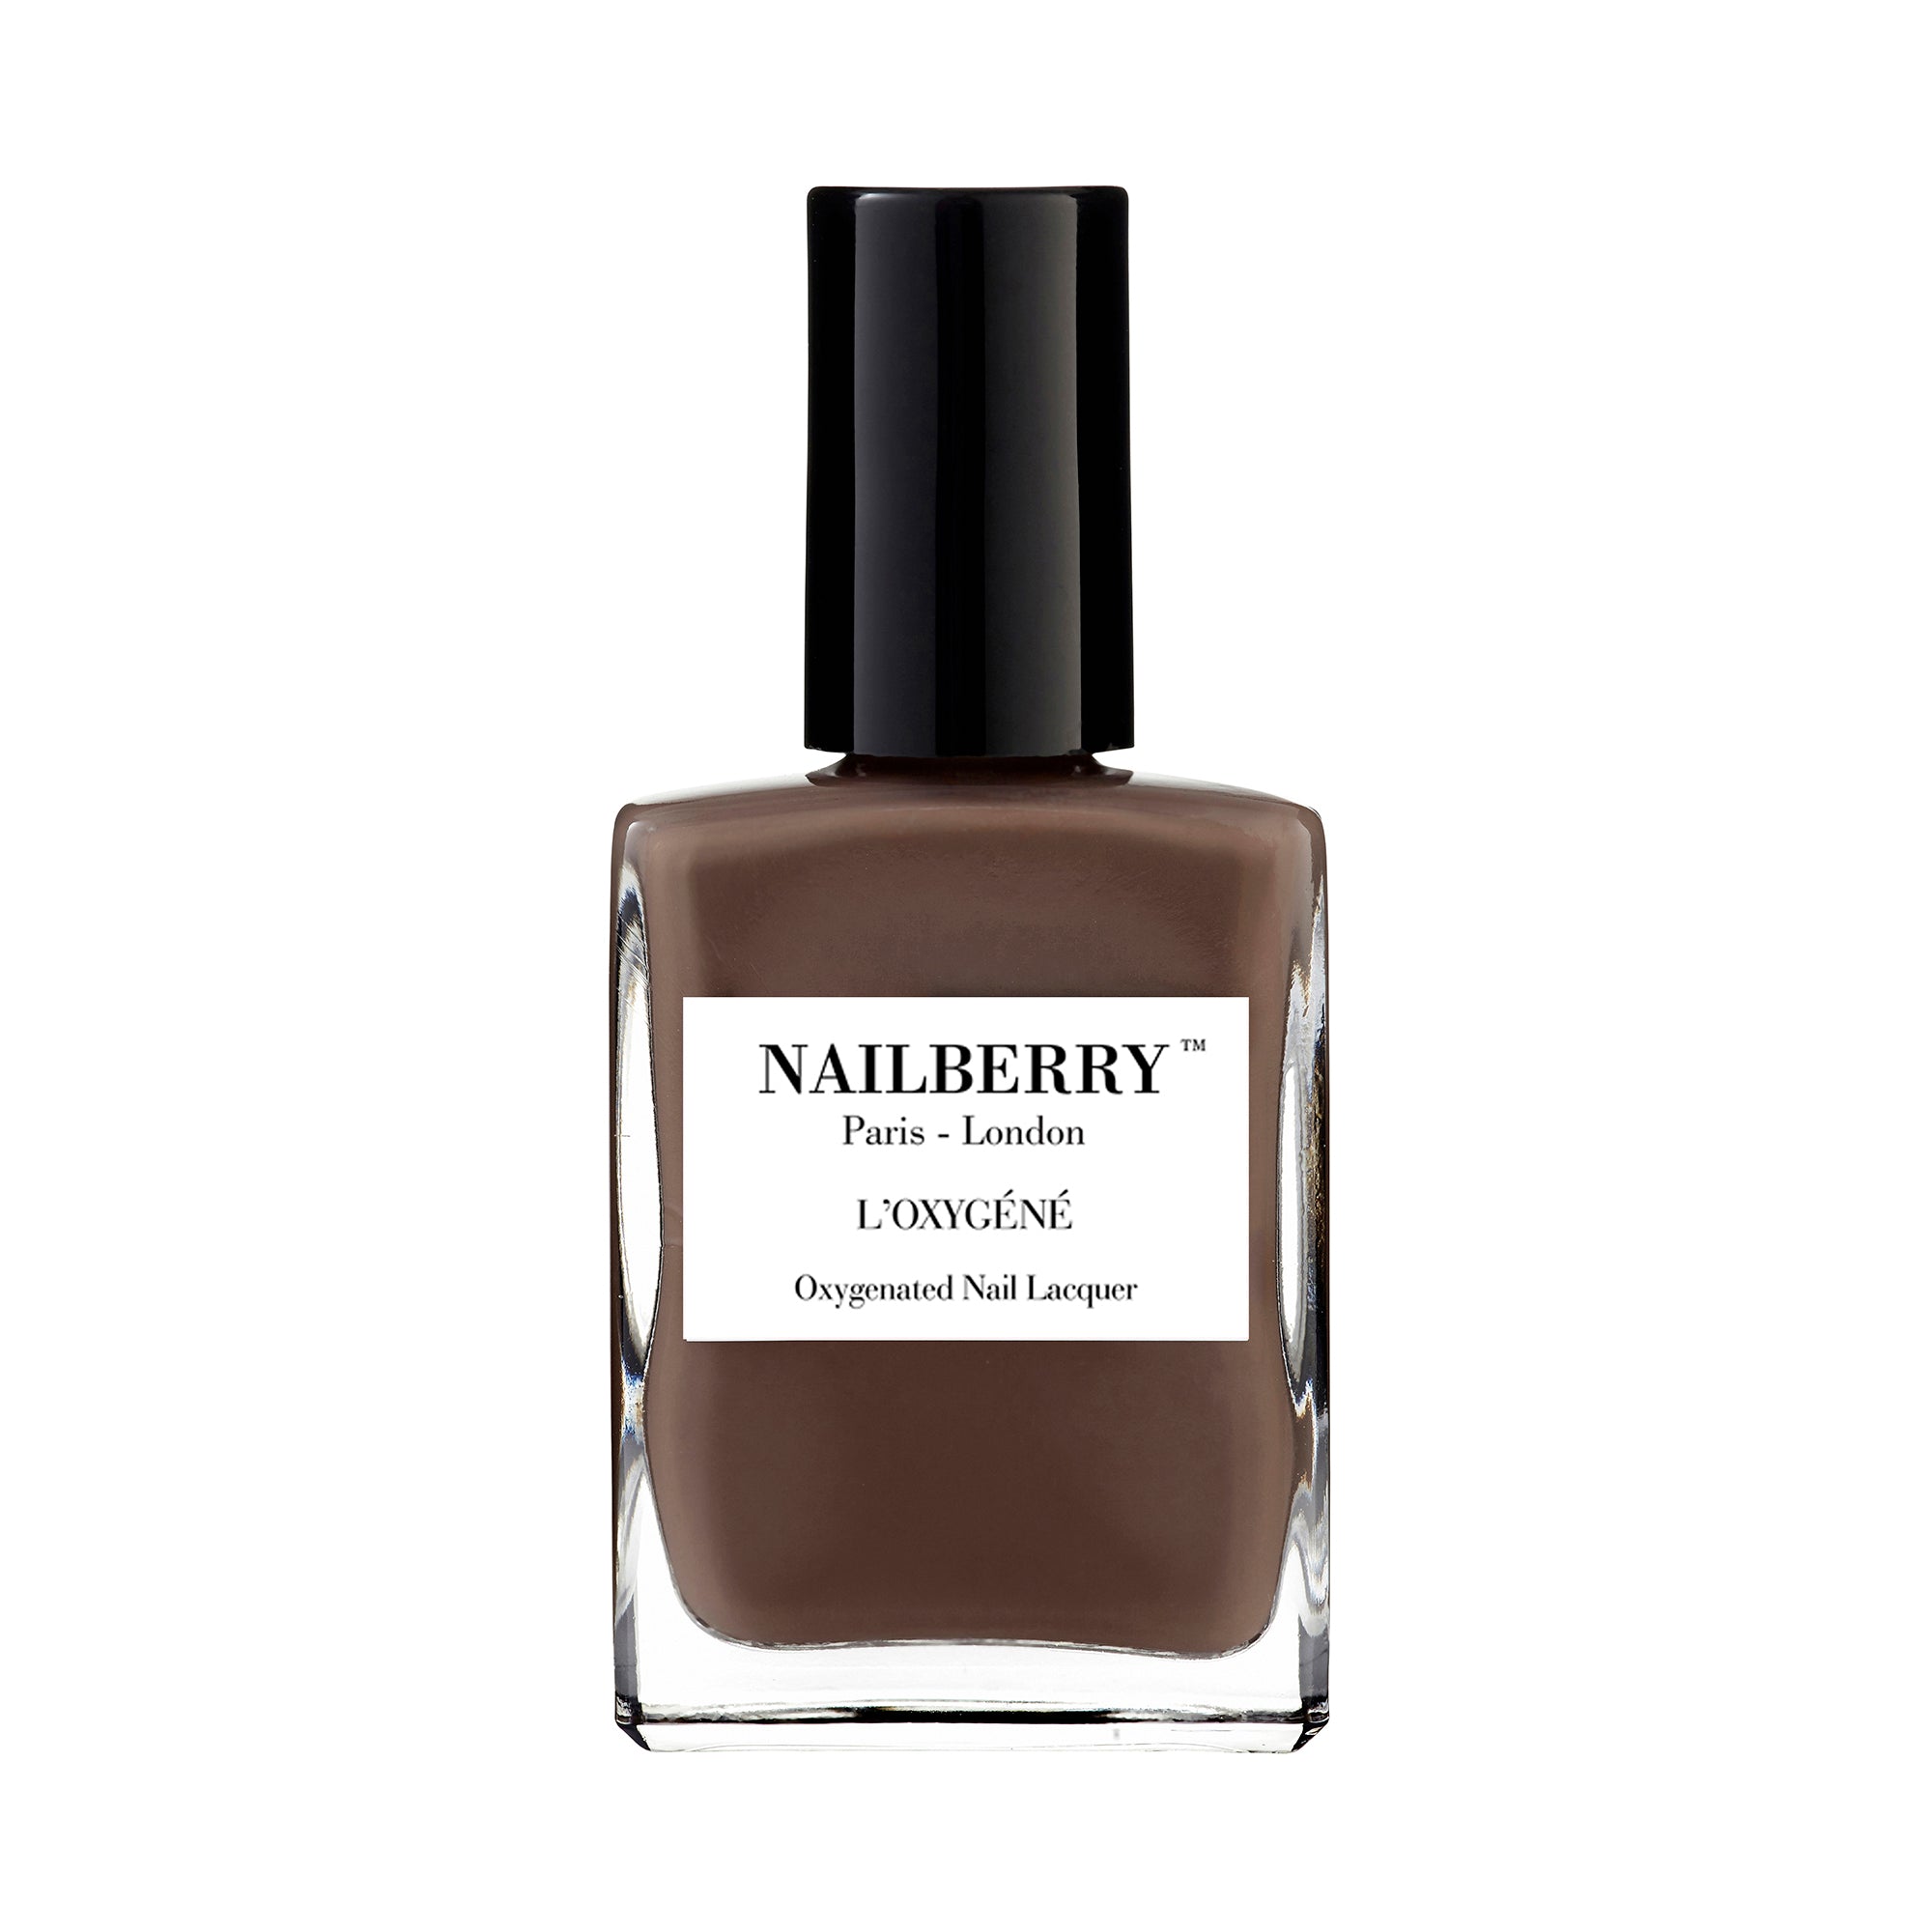 Nailberry Taupe La